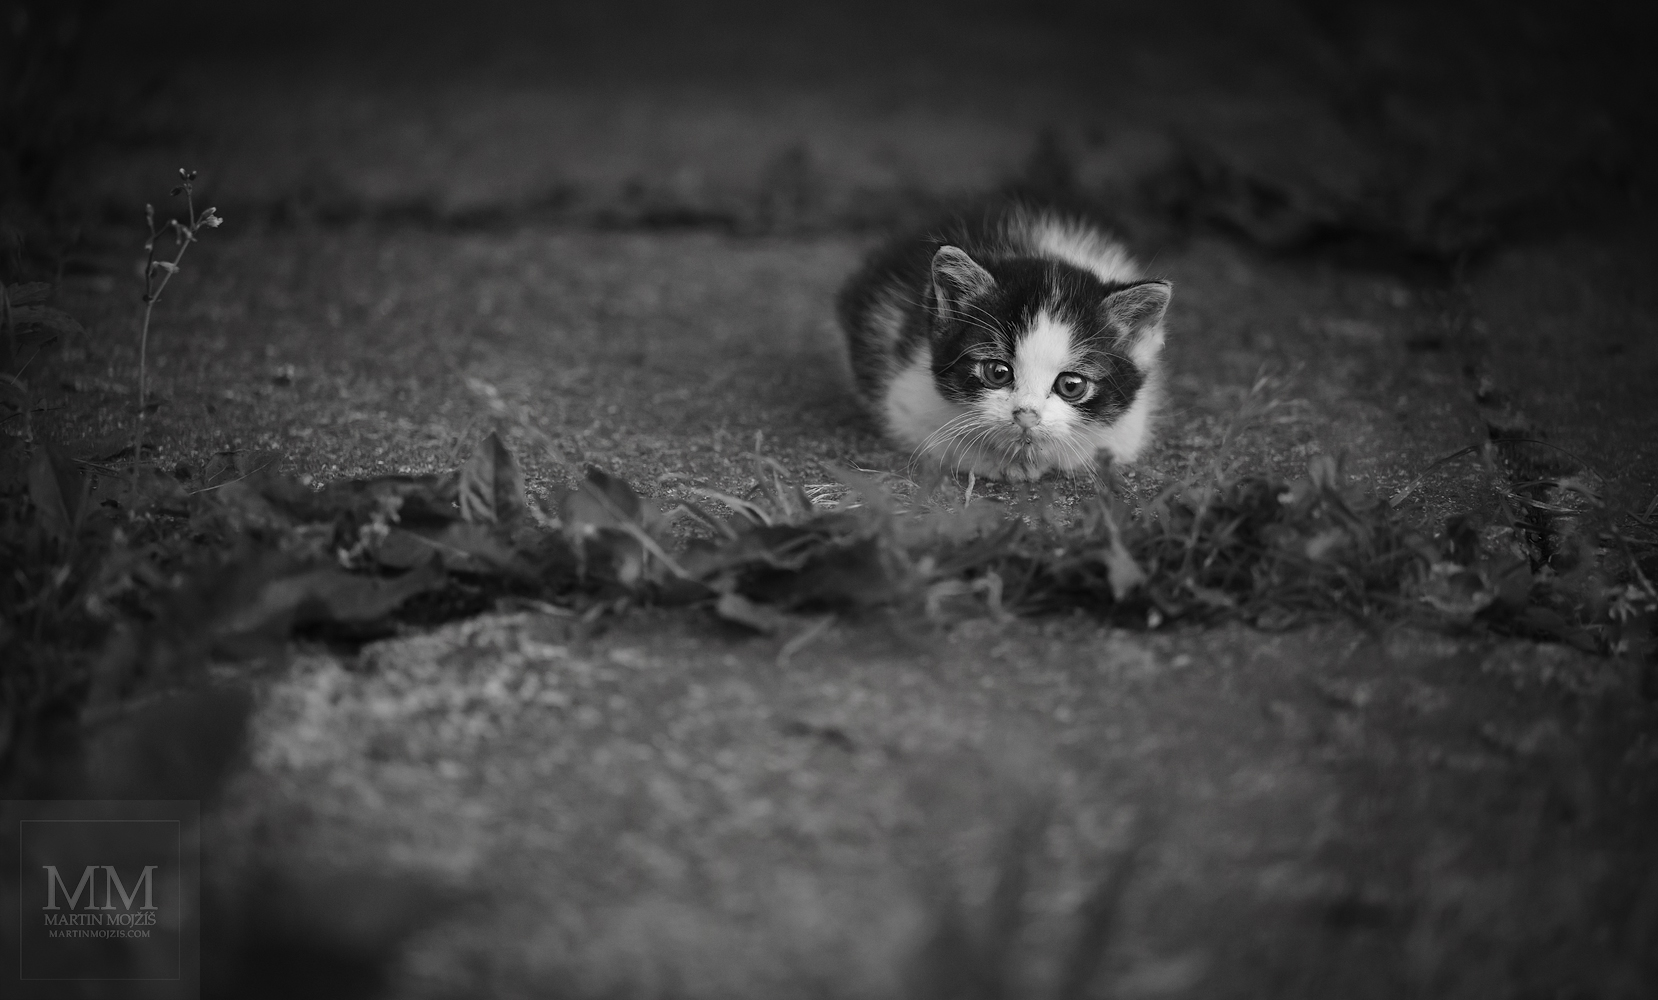 Little kitten sitting on the ground. Fine art black and white photograph ENCOUNTER AT THE BEGINNING OF SUMMER, photographed by Martin Mojzis.